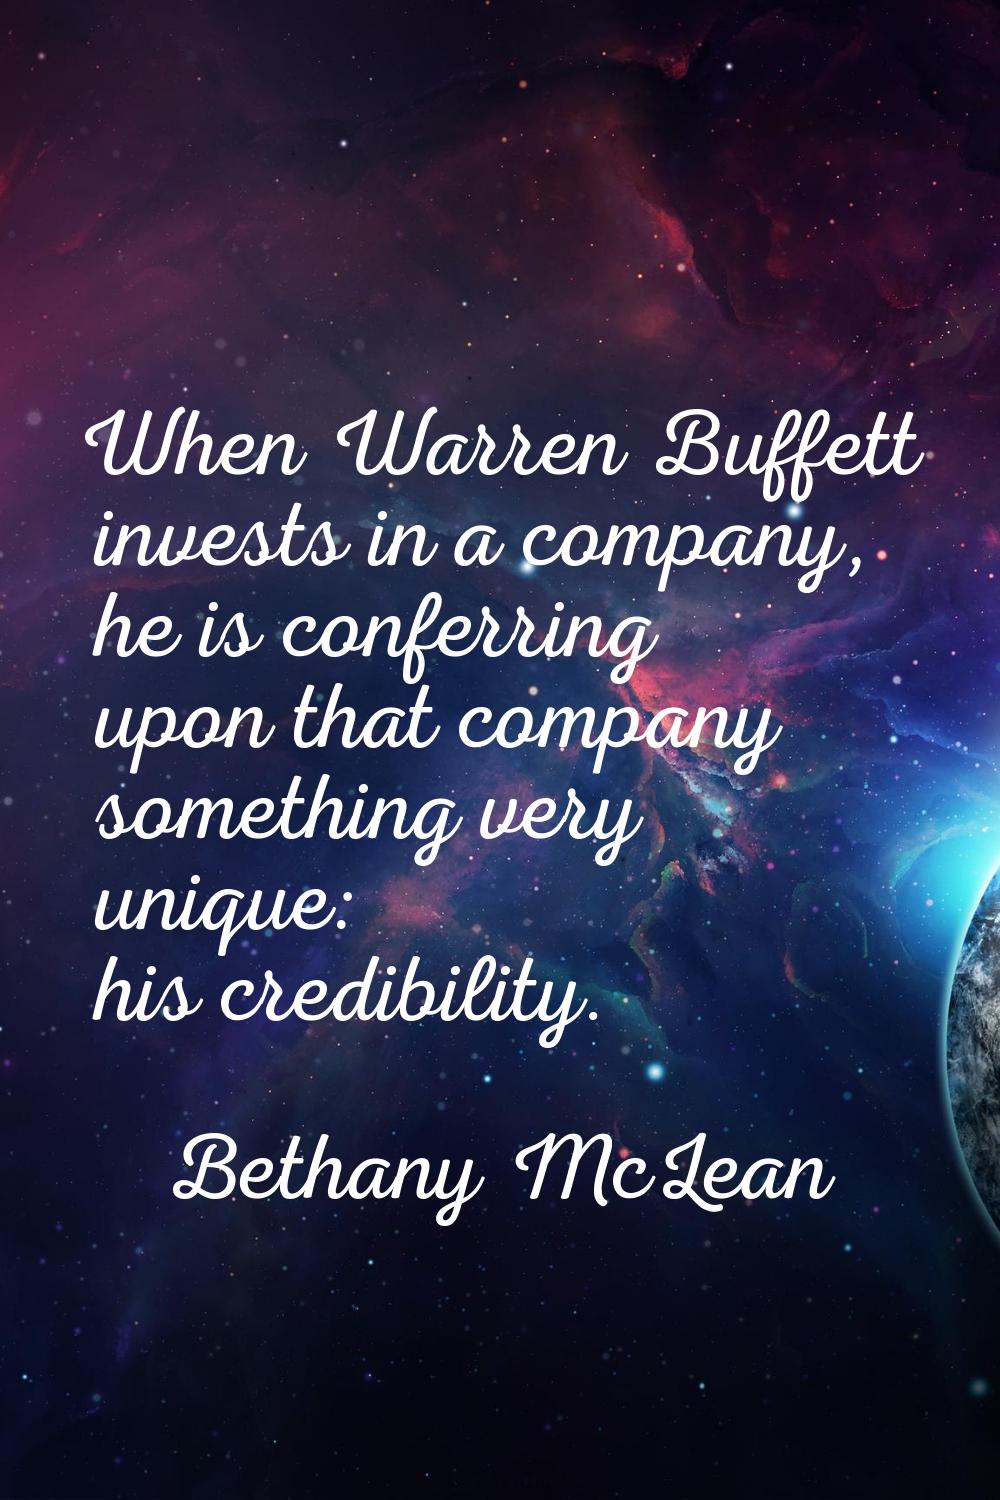 When Warren Buffett invests in a company, he is conferring upon that company something very unique: